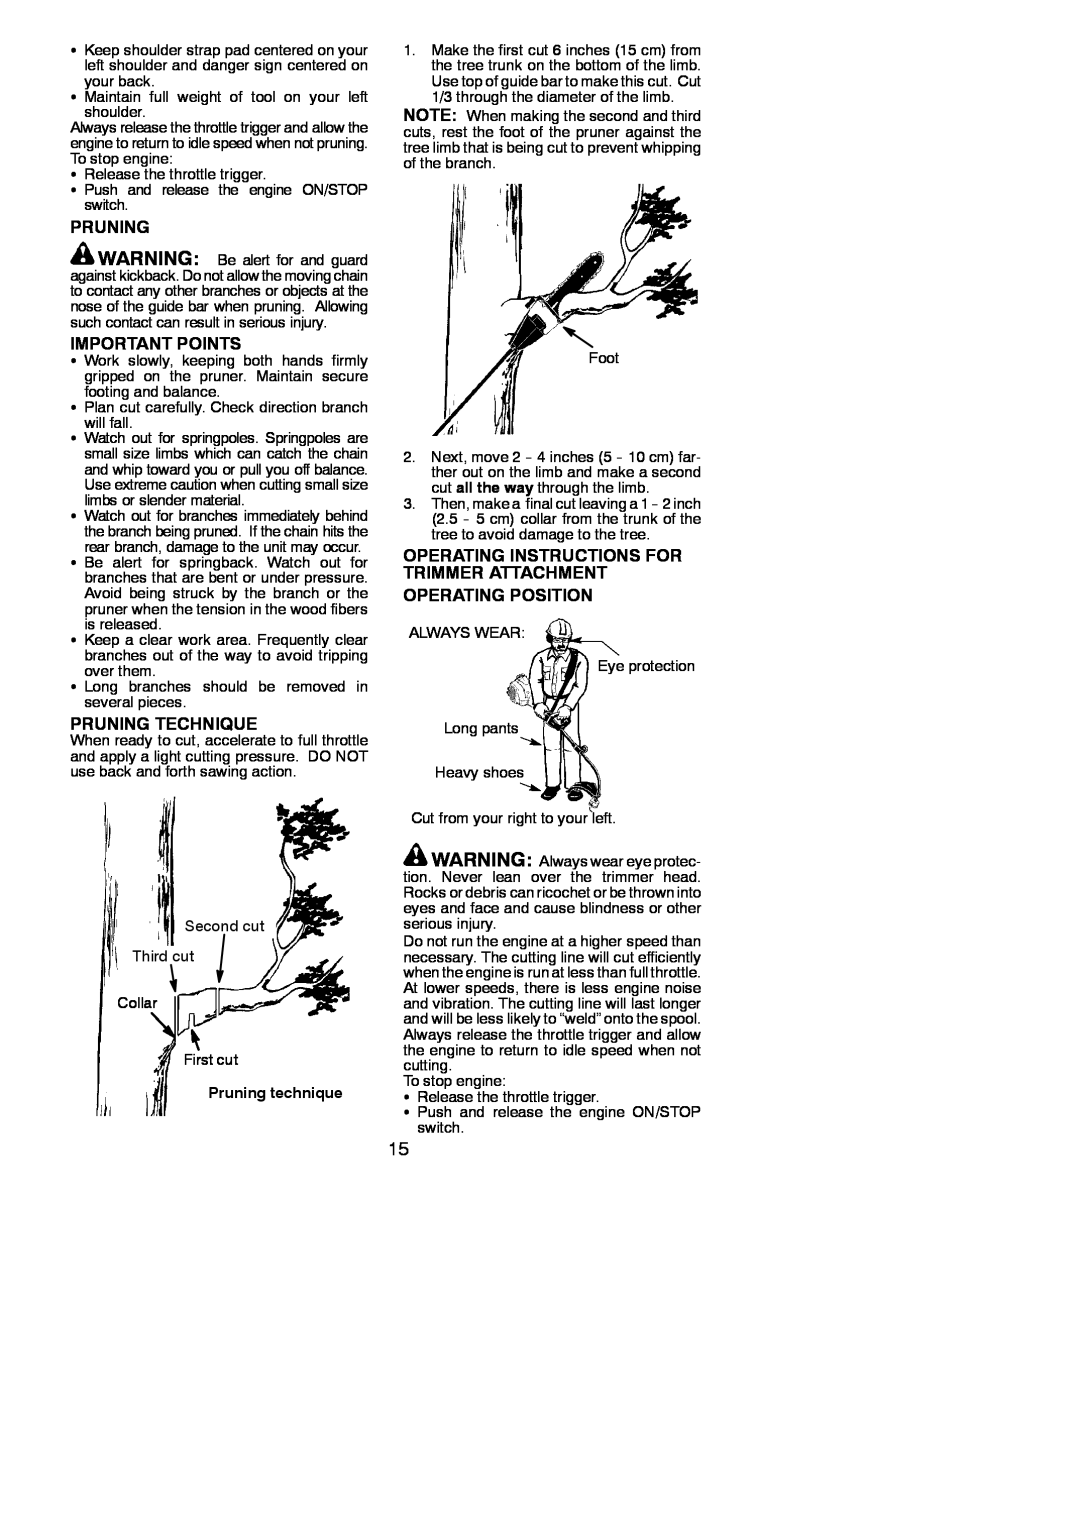 Poulan 115244926 Important Points, Pruning Technique, Operating Instructions For Trimmer Attachment Operating Position 